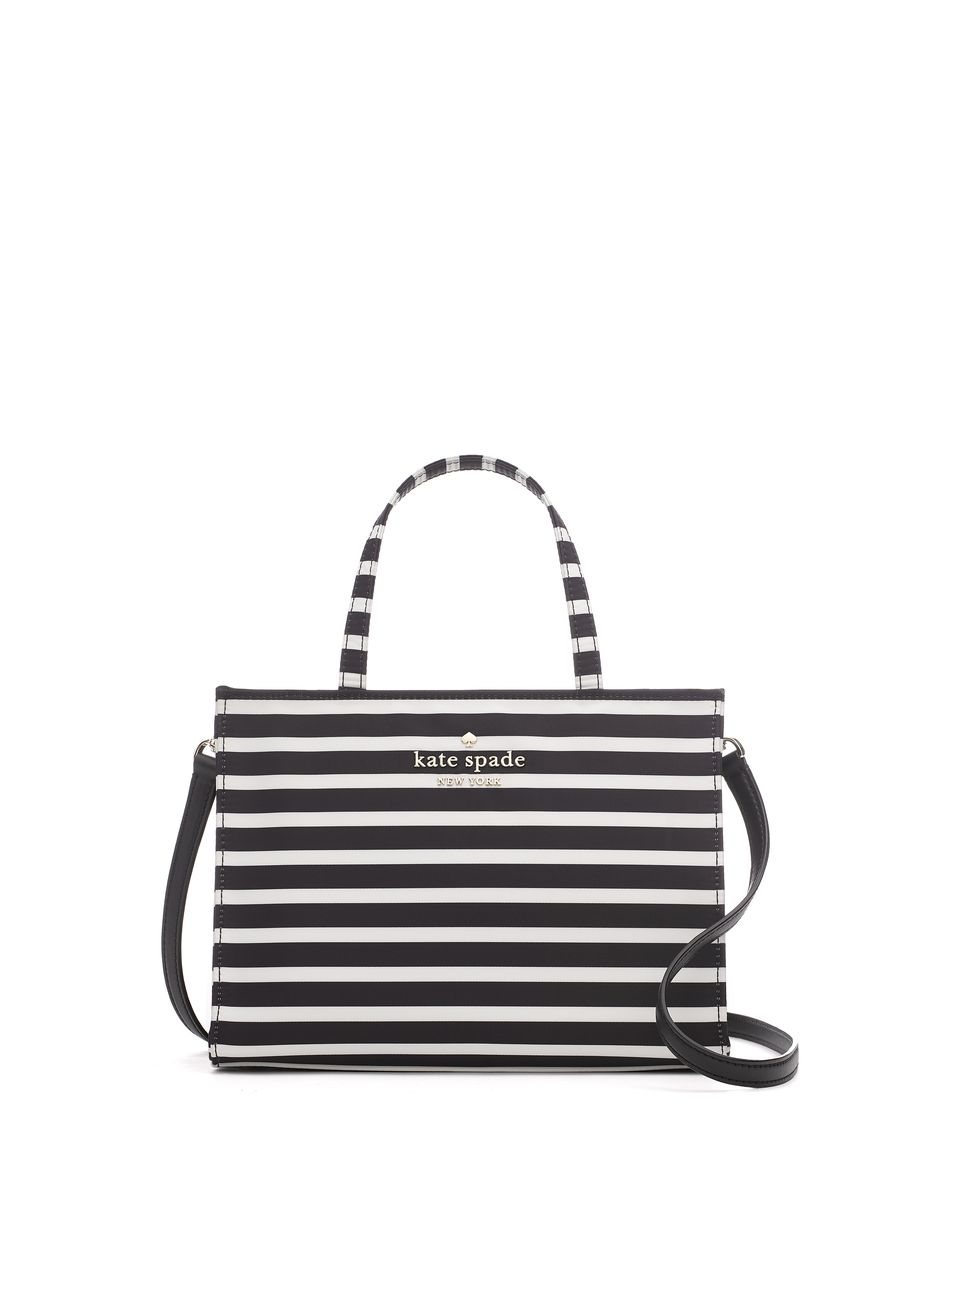 Kate Spade bags for fall 2021: Totes, crossbody bags, satchels